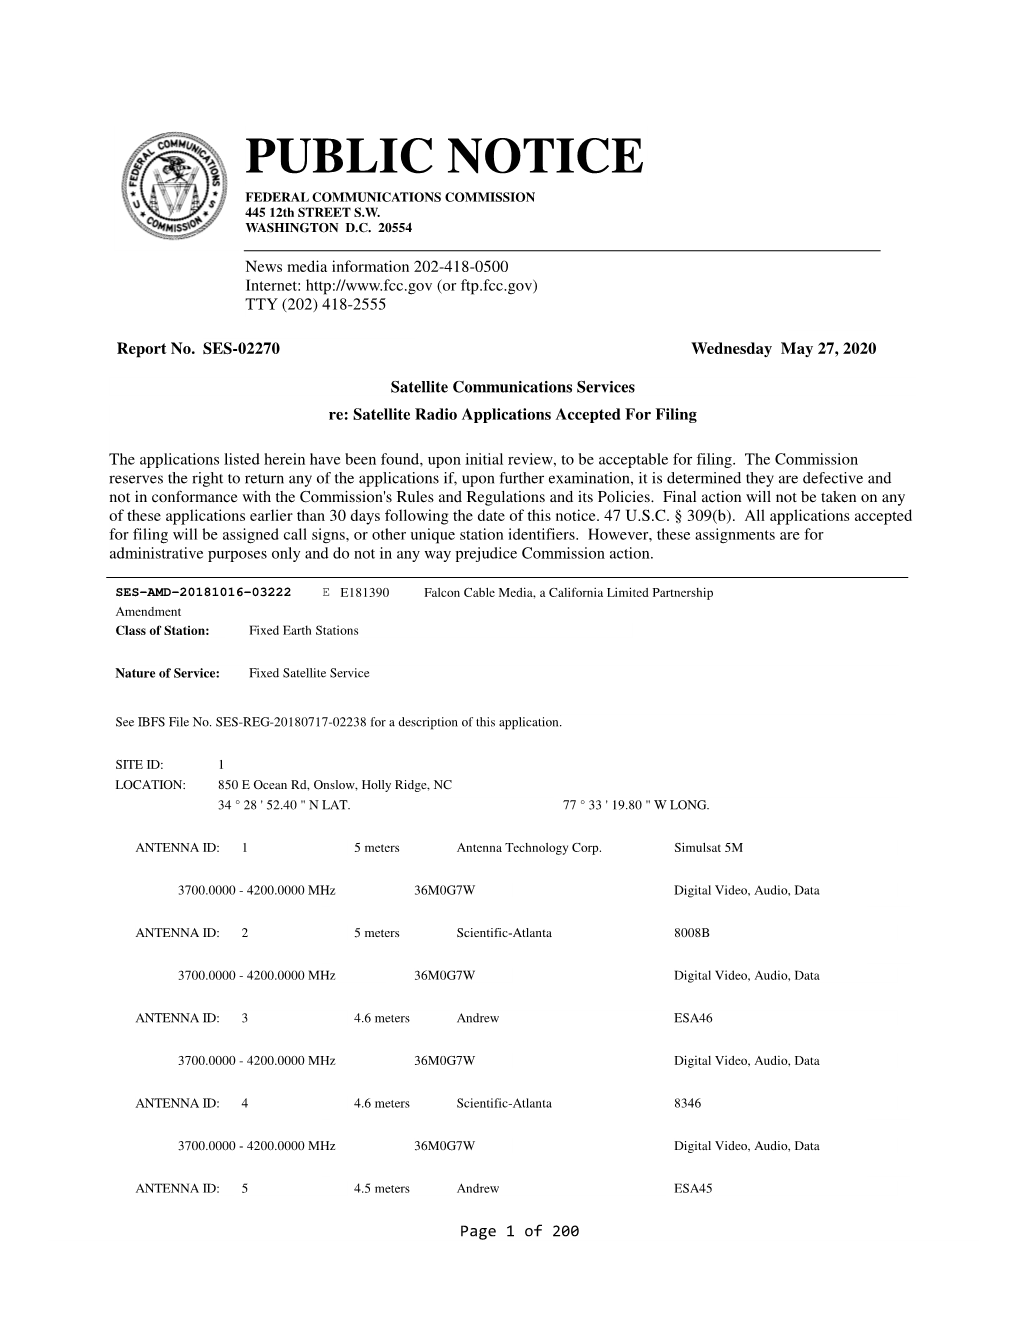 PUBLIC NOTICE FEDERAL COMMUNICATIONS COMMISSION 445 12Th STREET S.W